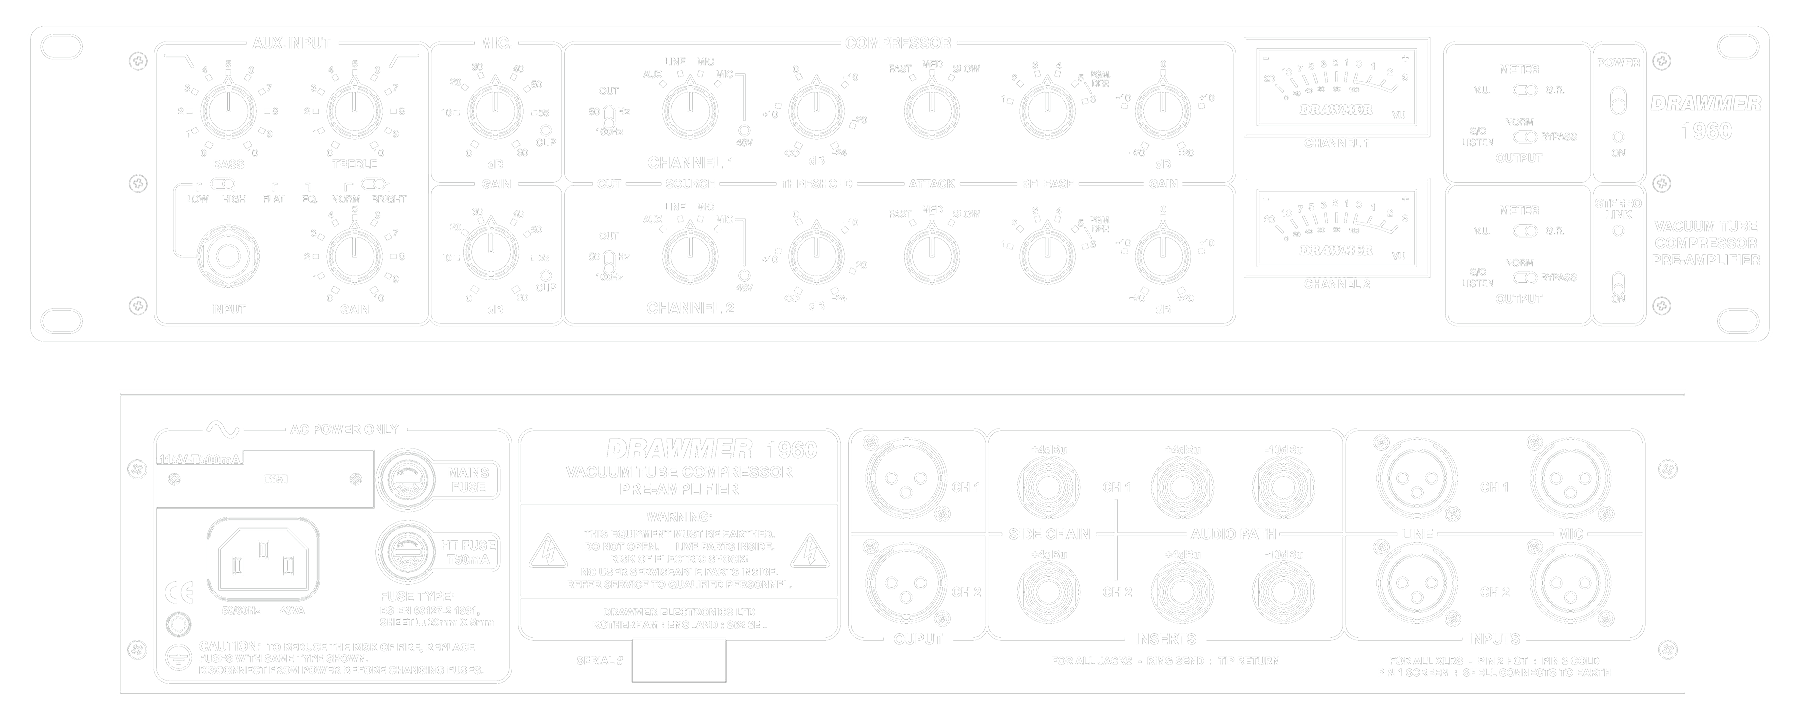 A line drawing of the front and rear panels of the 1960 showing controls and connectors